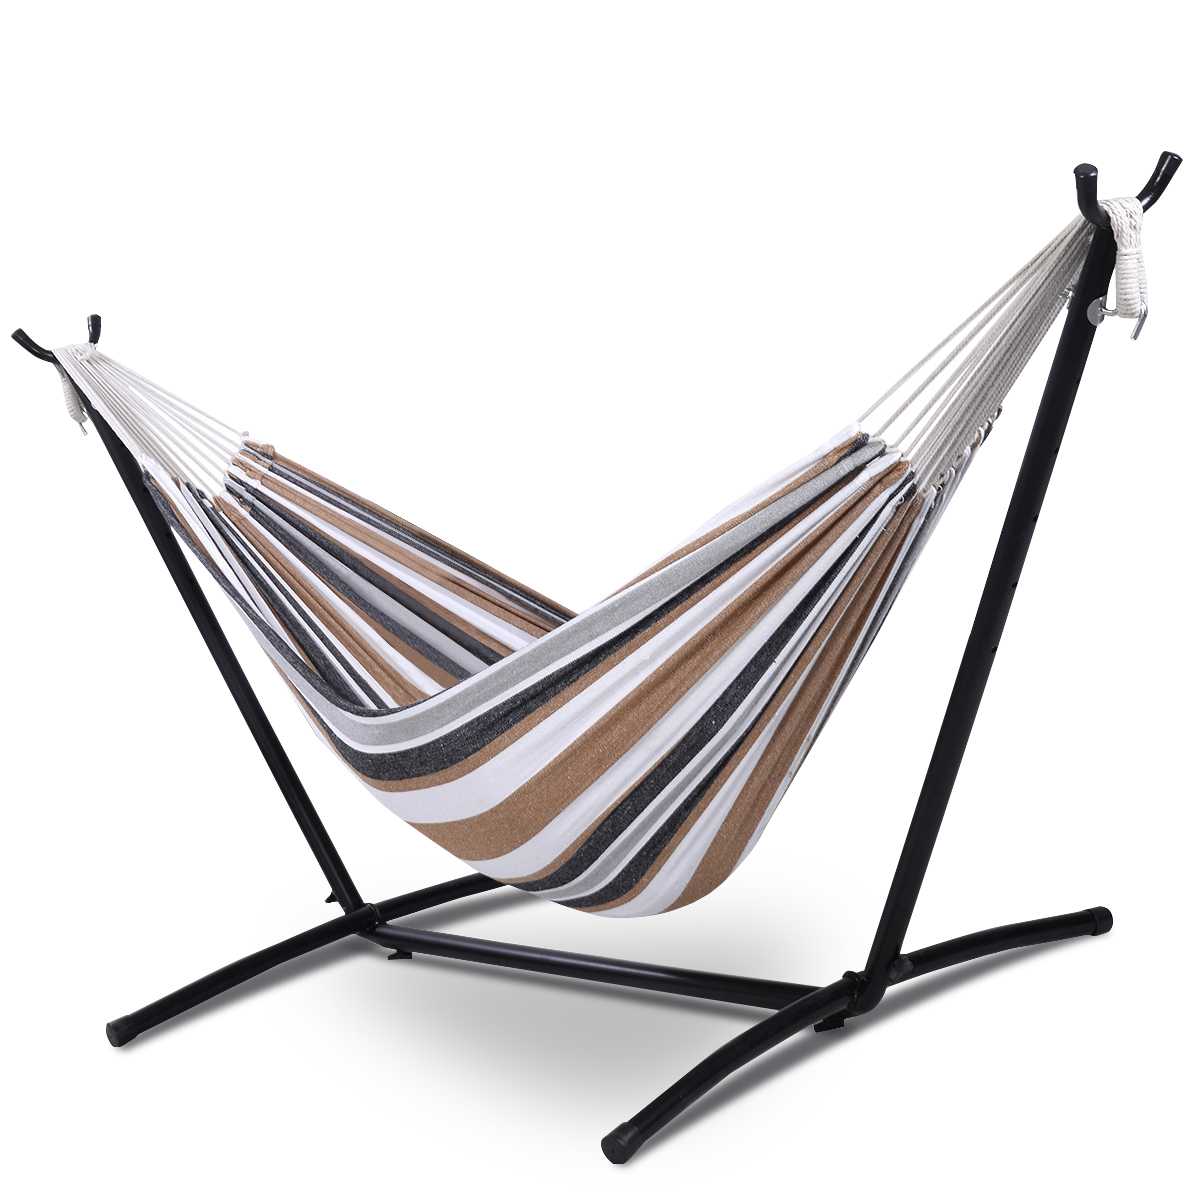 YouYeap Portable Double Hammock with Stand Included - image 1 of 6